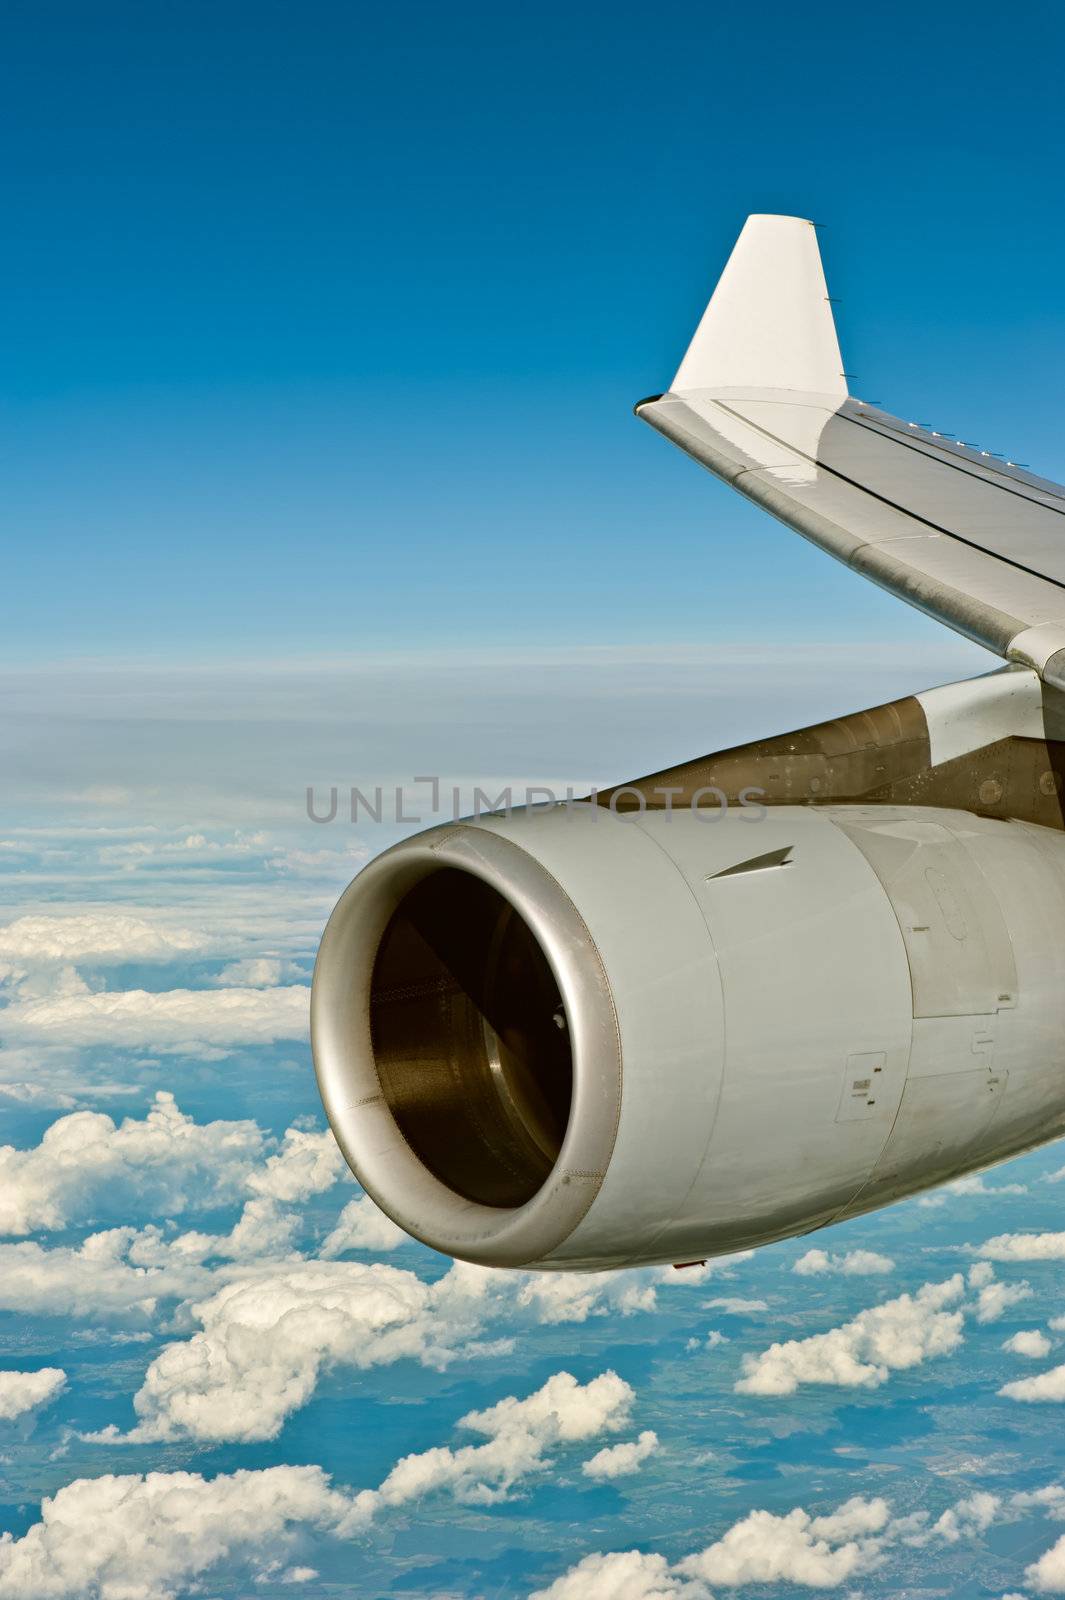 Jet engine of an airplane over the cloudscapea